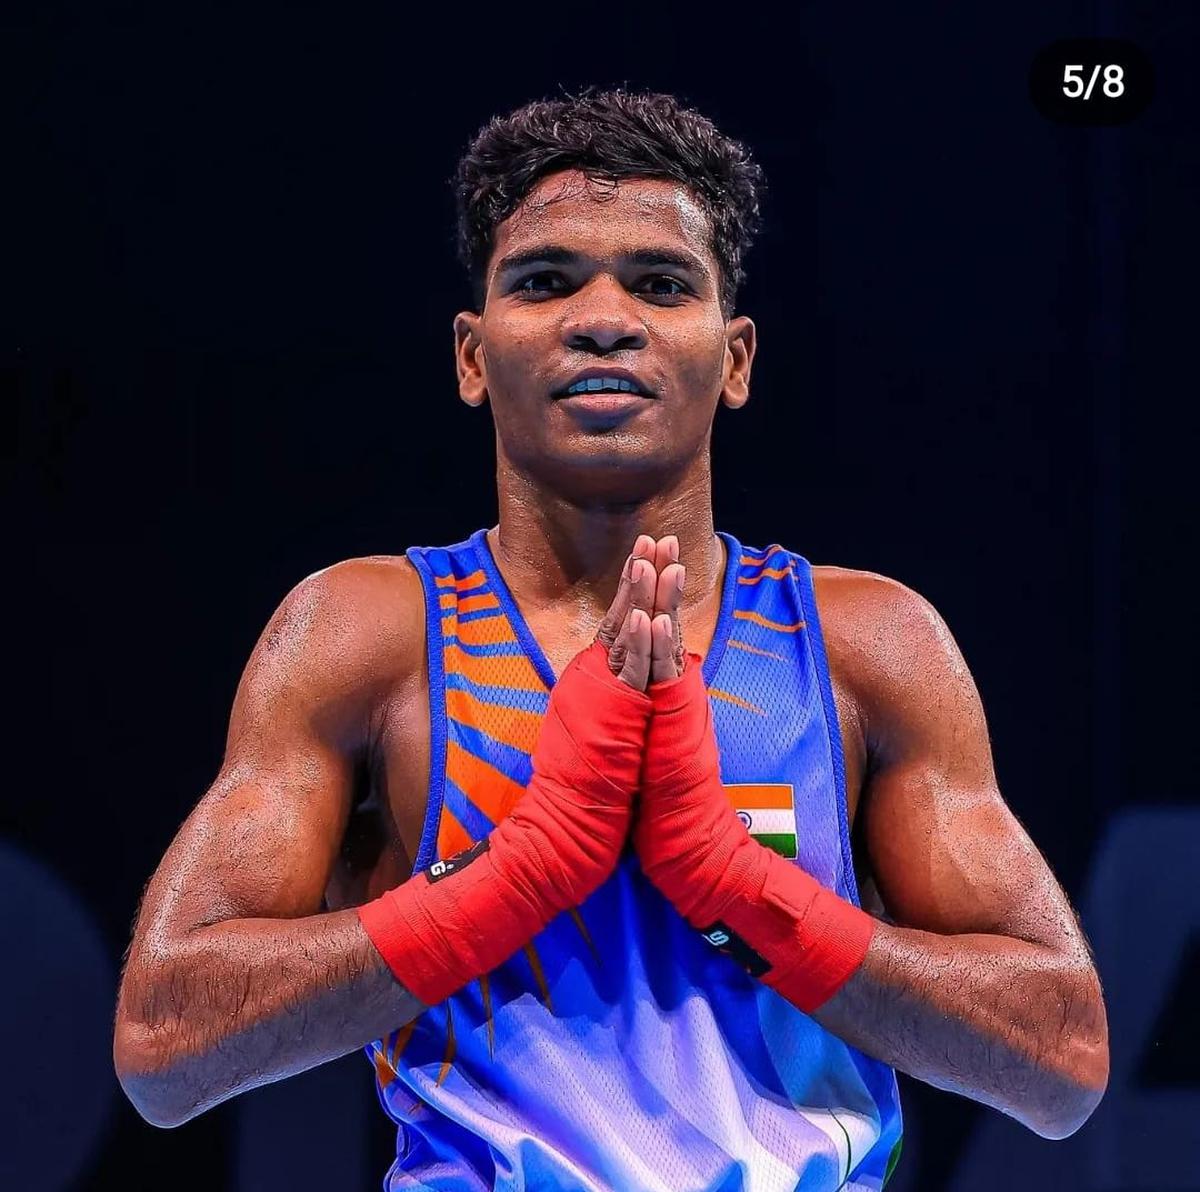 Still have a long way to go, says boxer Vishvanath on winning World Youth championships